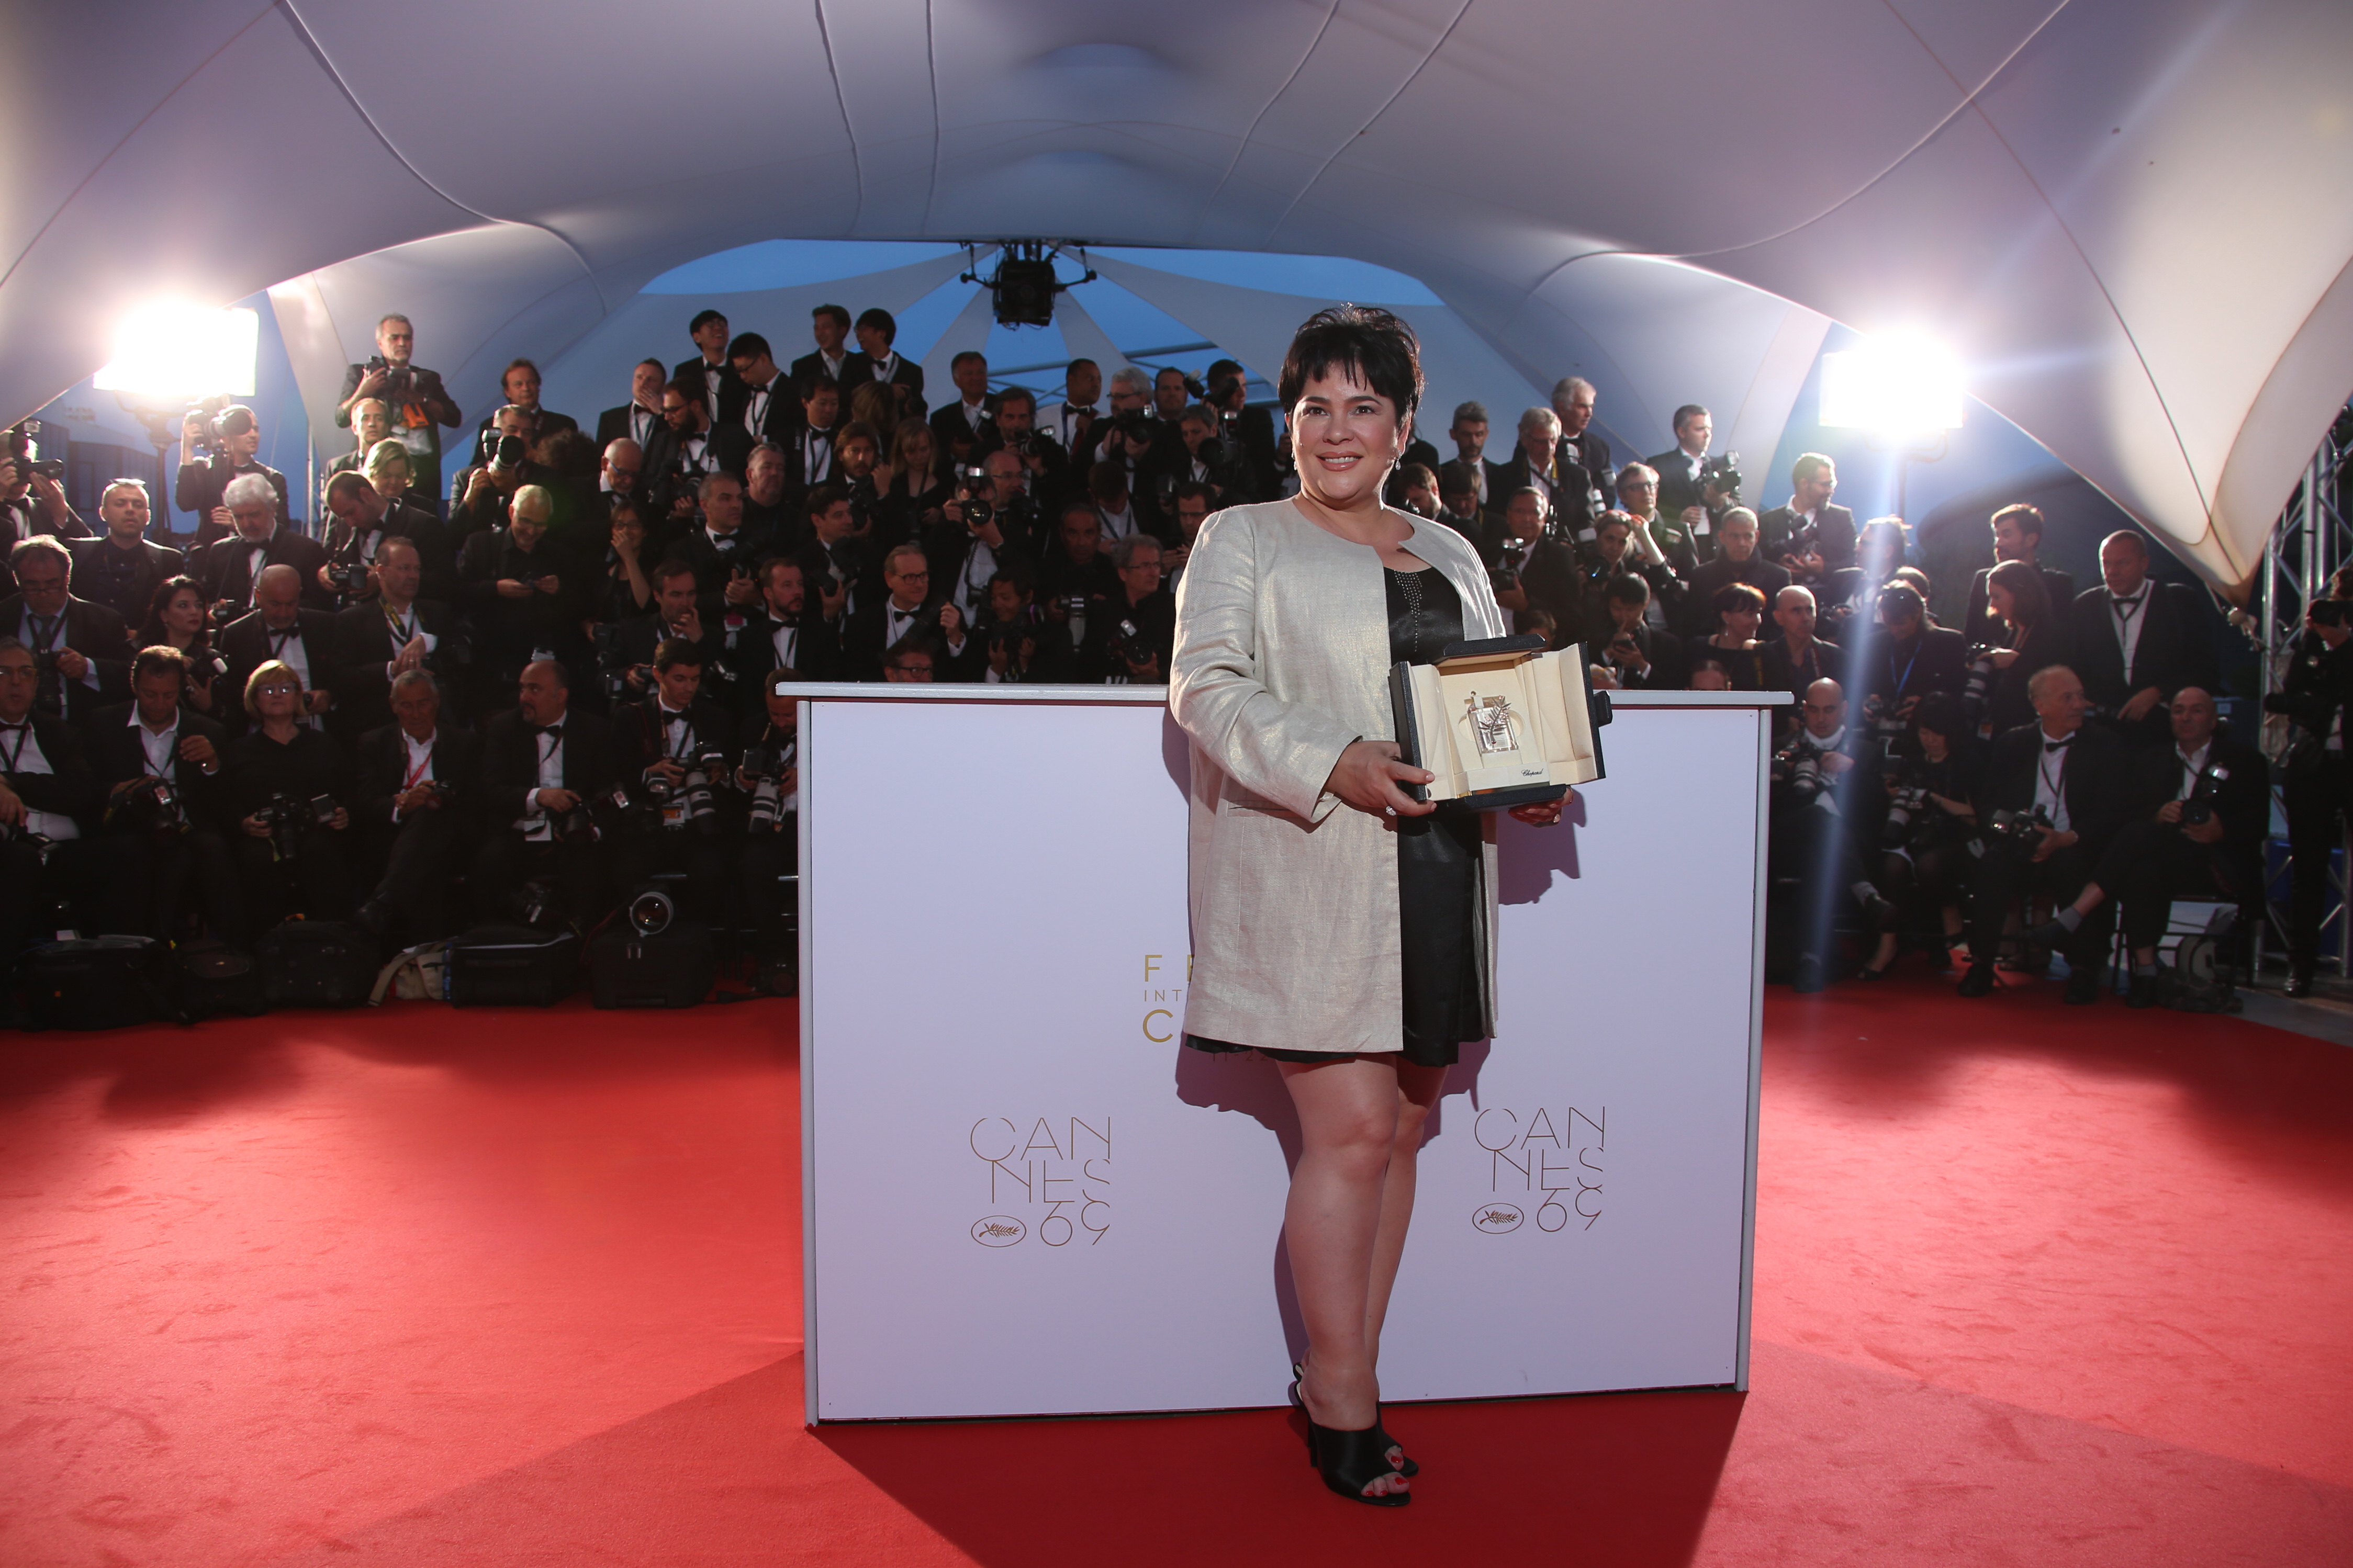 Actress Jaclyn Jose pose for photographers with her Best Actress award for her role in the film Ma' Rosa during the photo call following the awards ceremony at the 69th international film festival, Cannes, southern France, Sunday, May 22, 2016. (AP Photo/Joel Ryan)